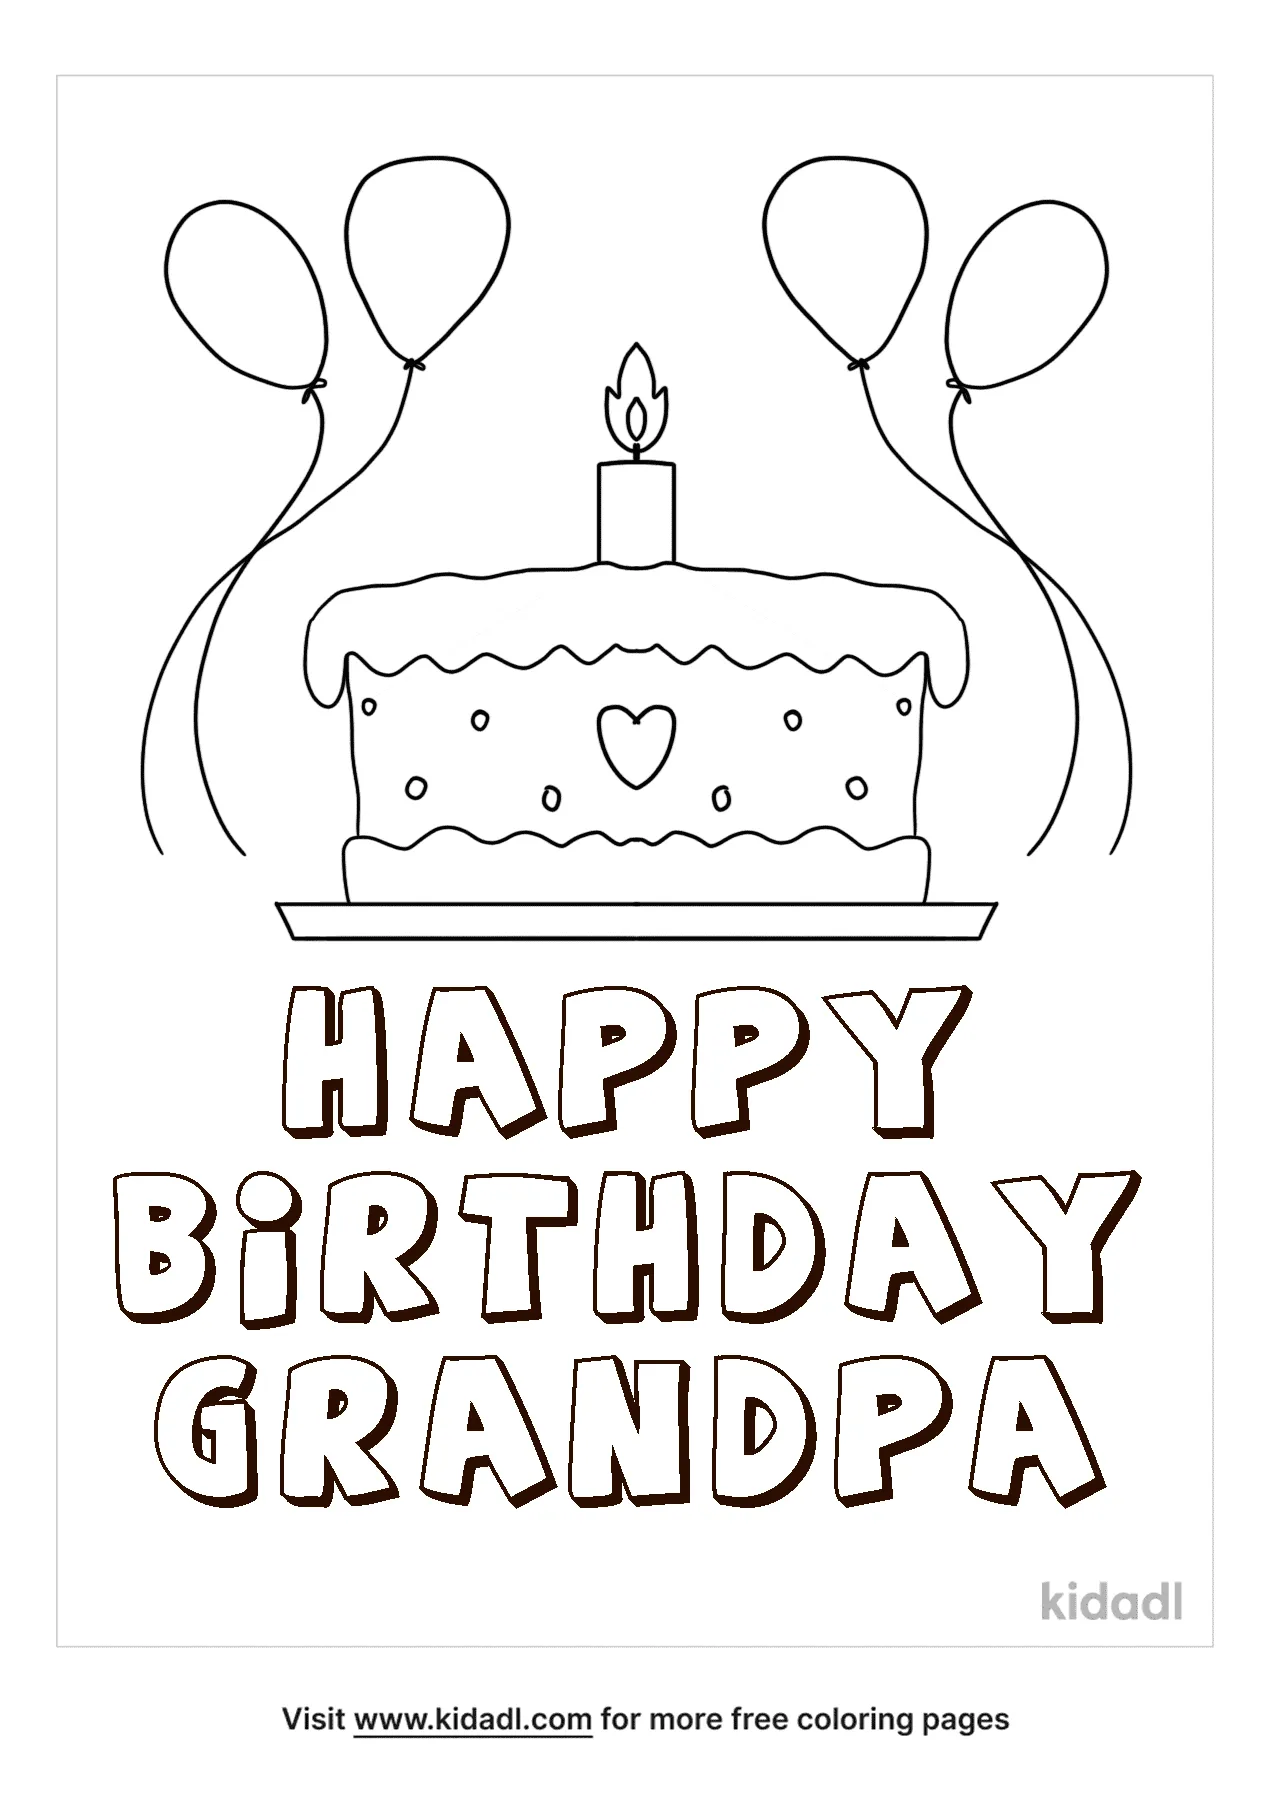 Free happy birthday grandpa coloring page coloring page printables